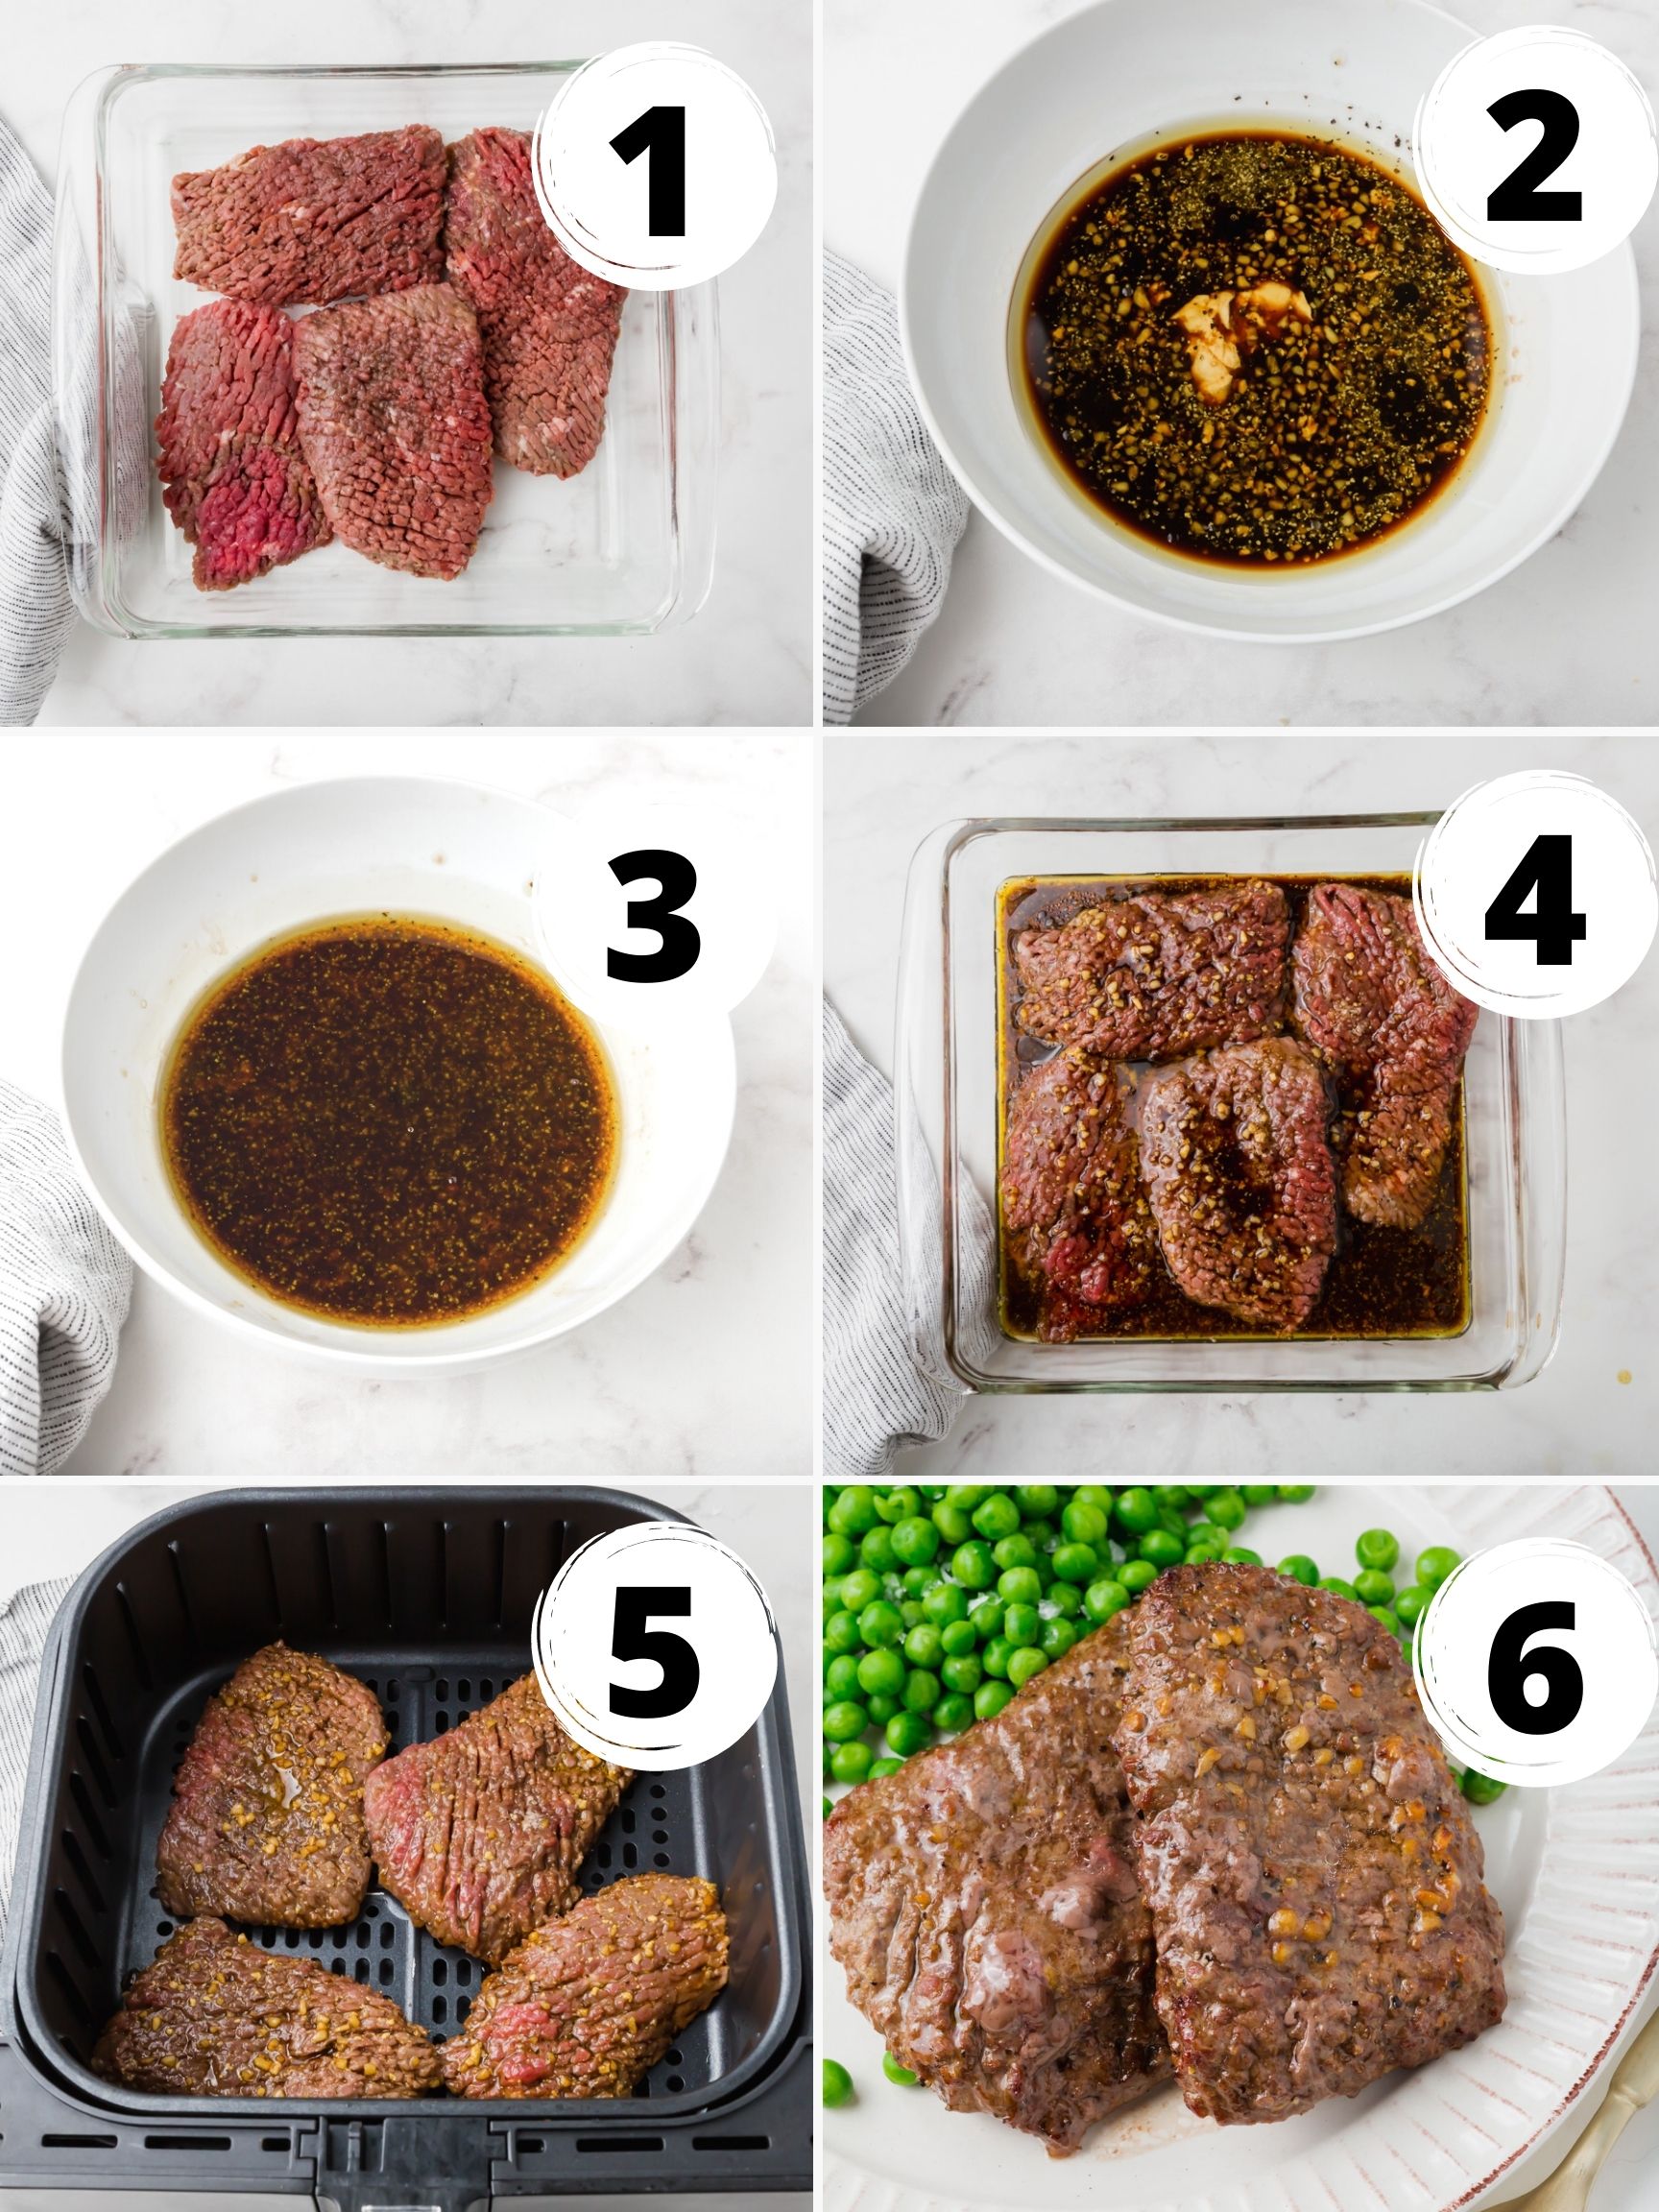 Collage showing the six steps needed to make cube steak in an air fryer